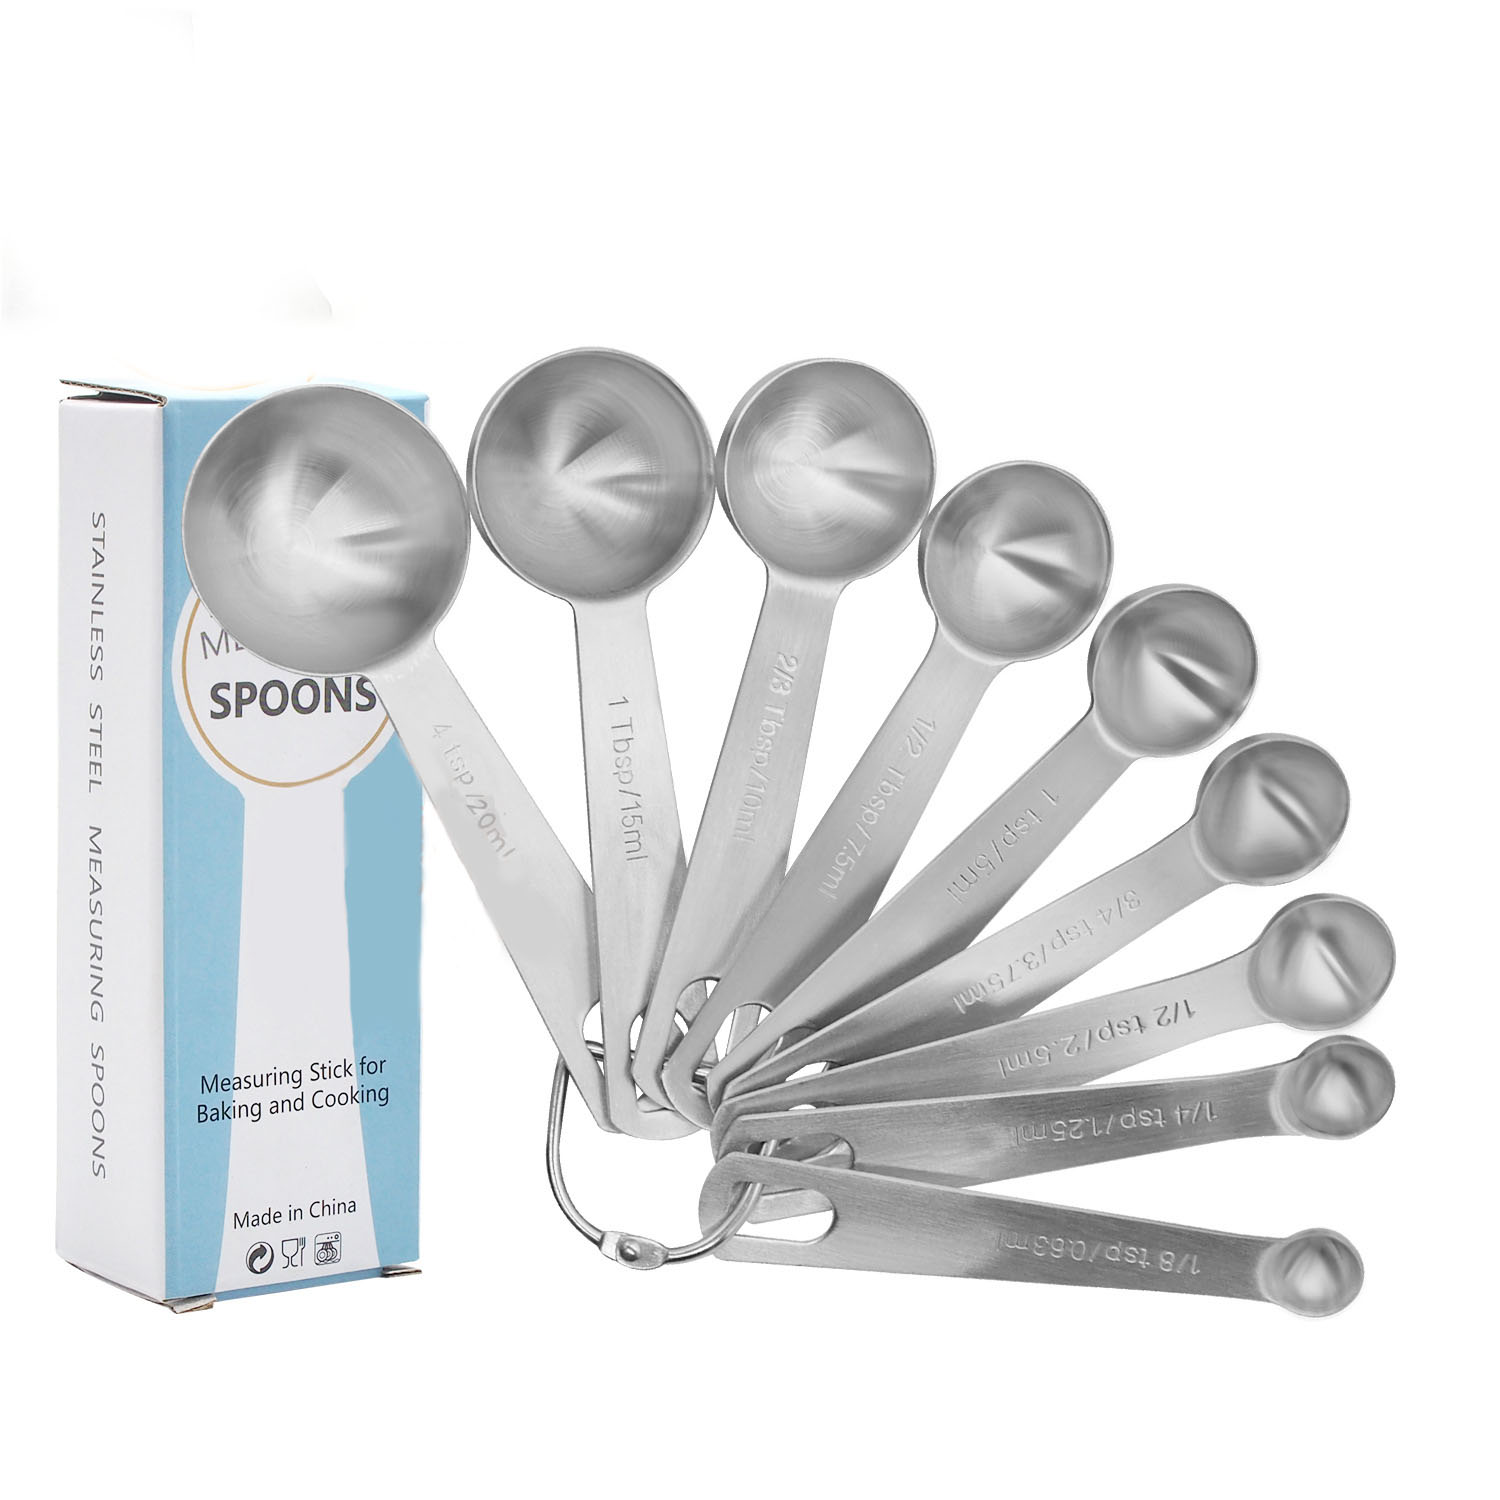 Kitchen measuring cups spoon set Stainless steel measuring cup and spoons set of 9 piece